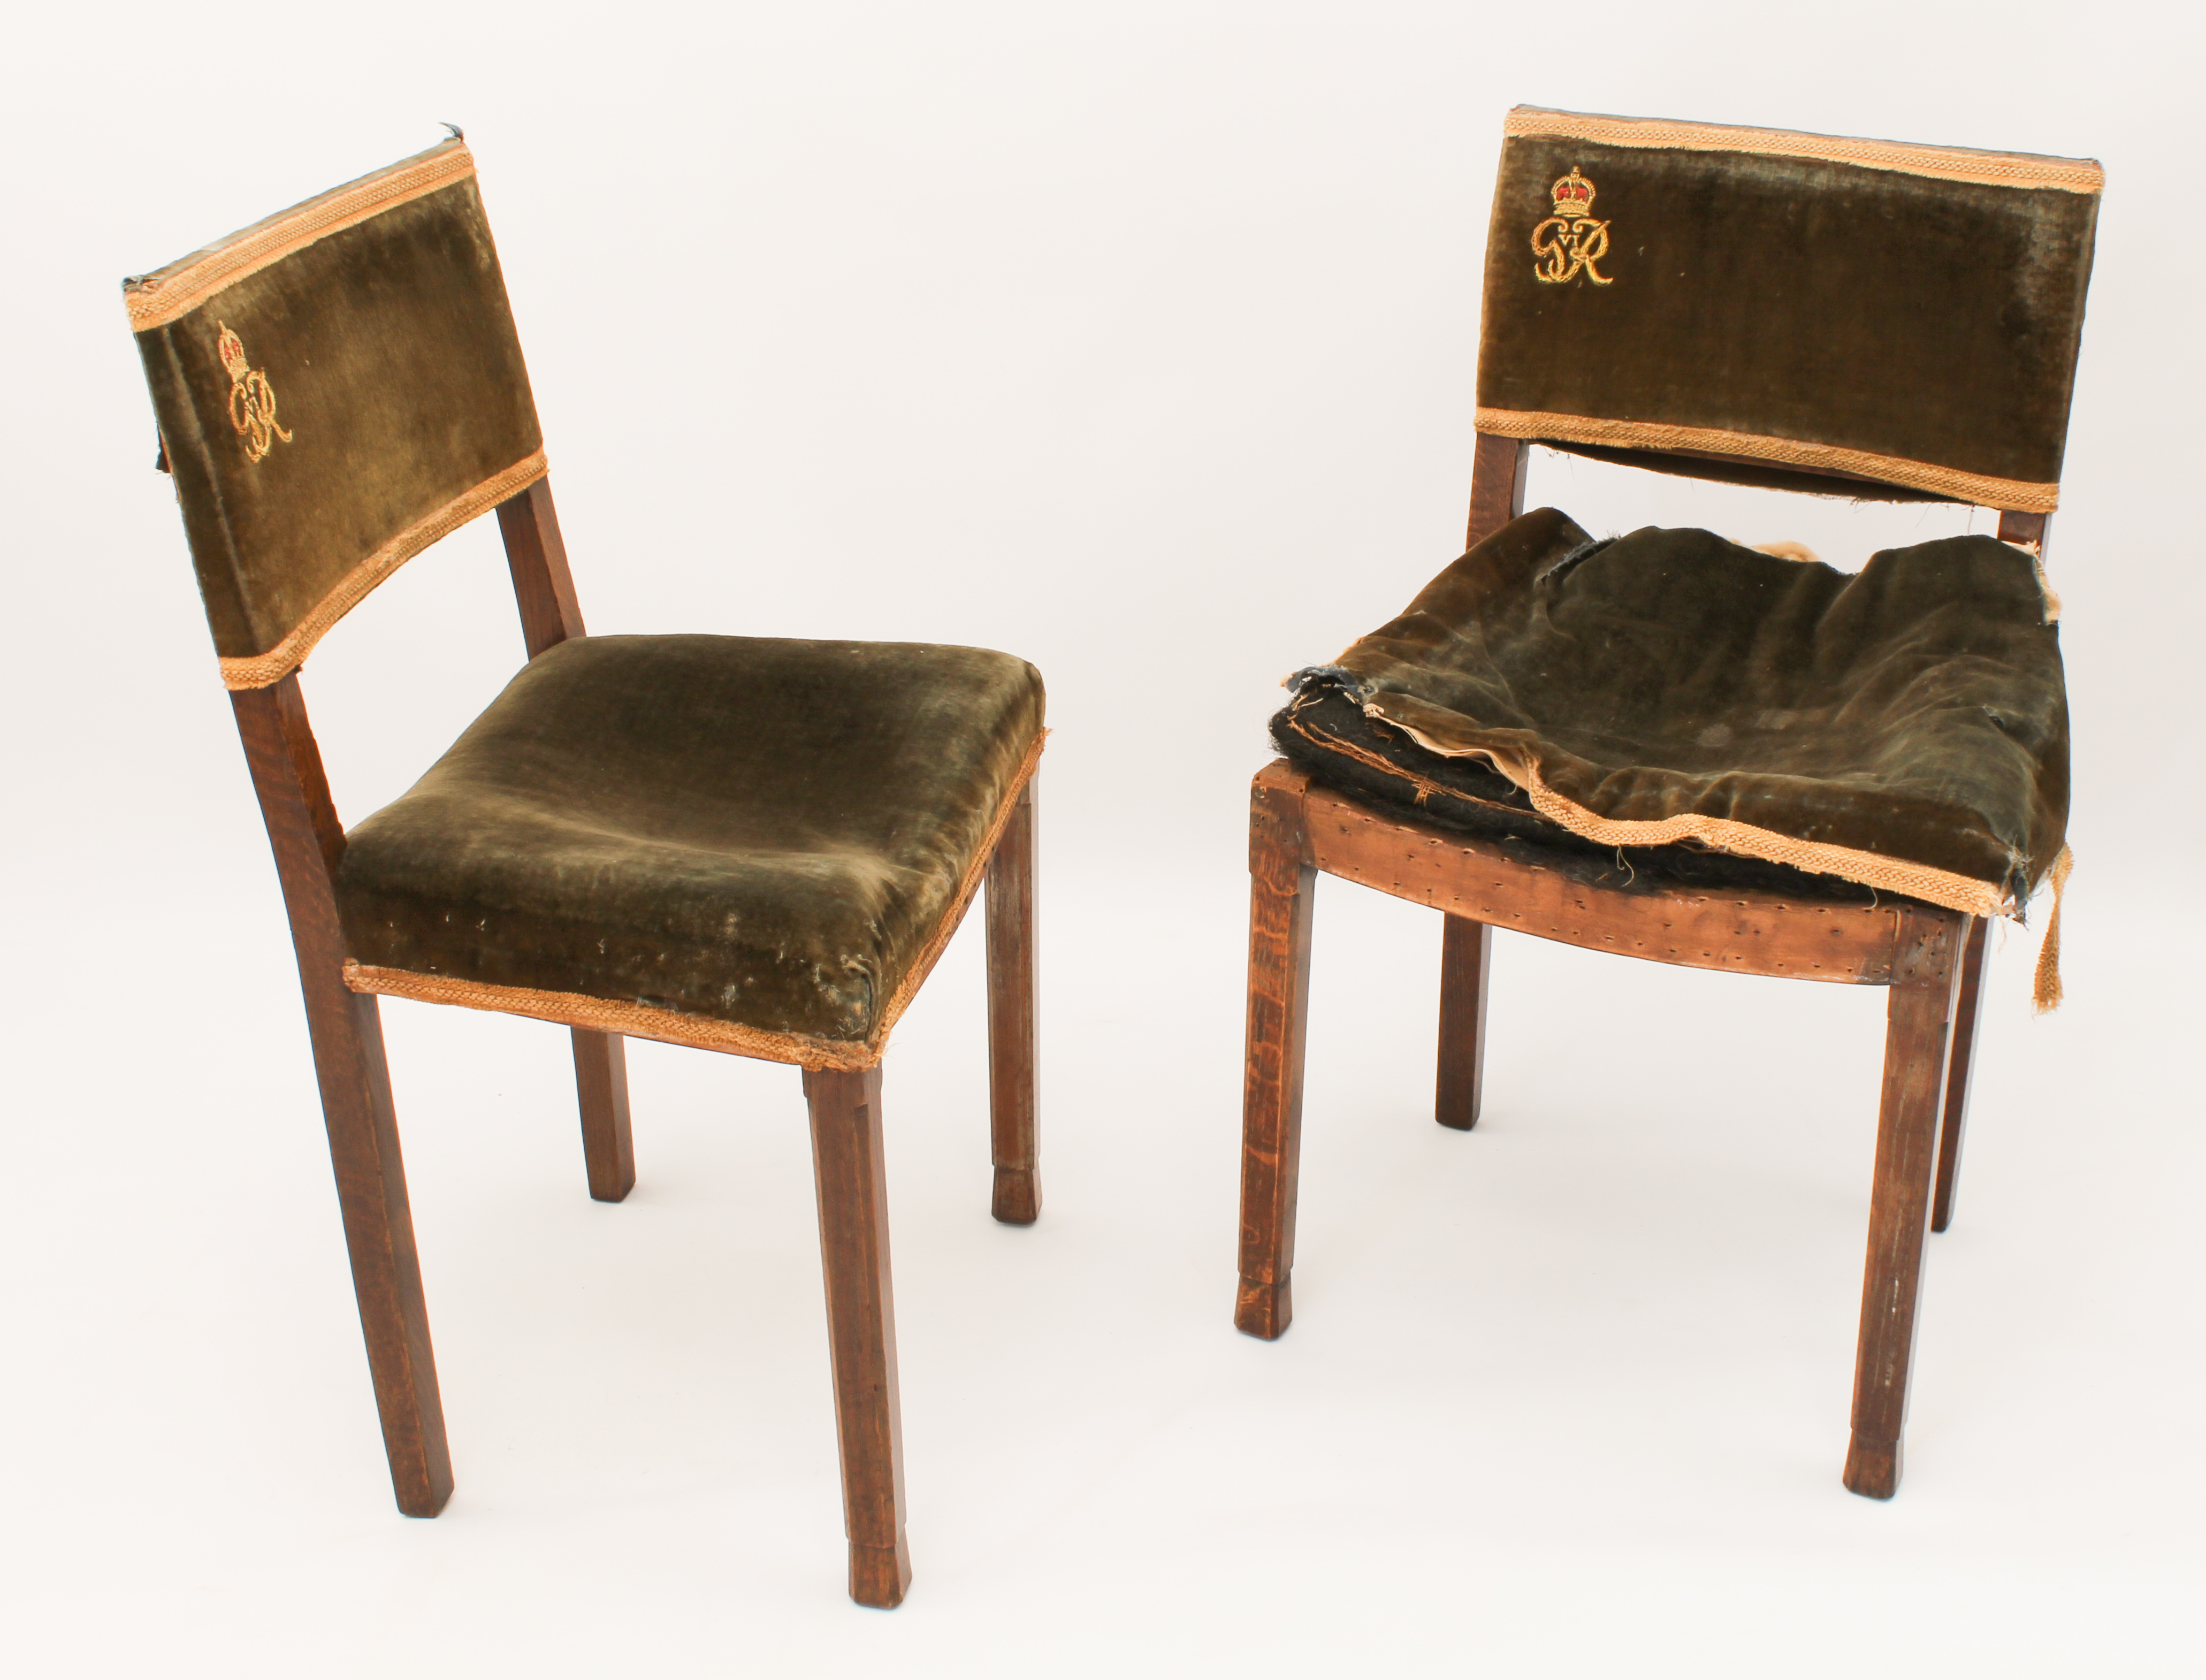 A pair of George VI Coronation chairs by Hands & Sons - the frames stamped 'CORONATION 1937